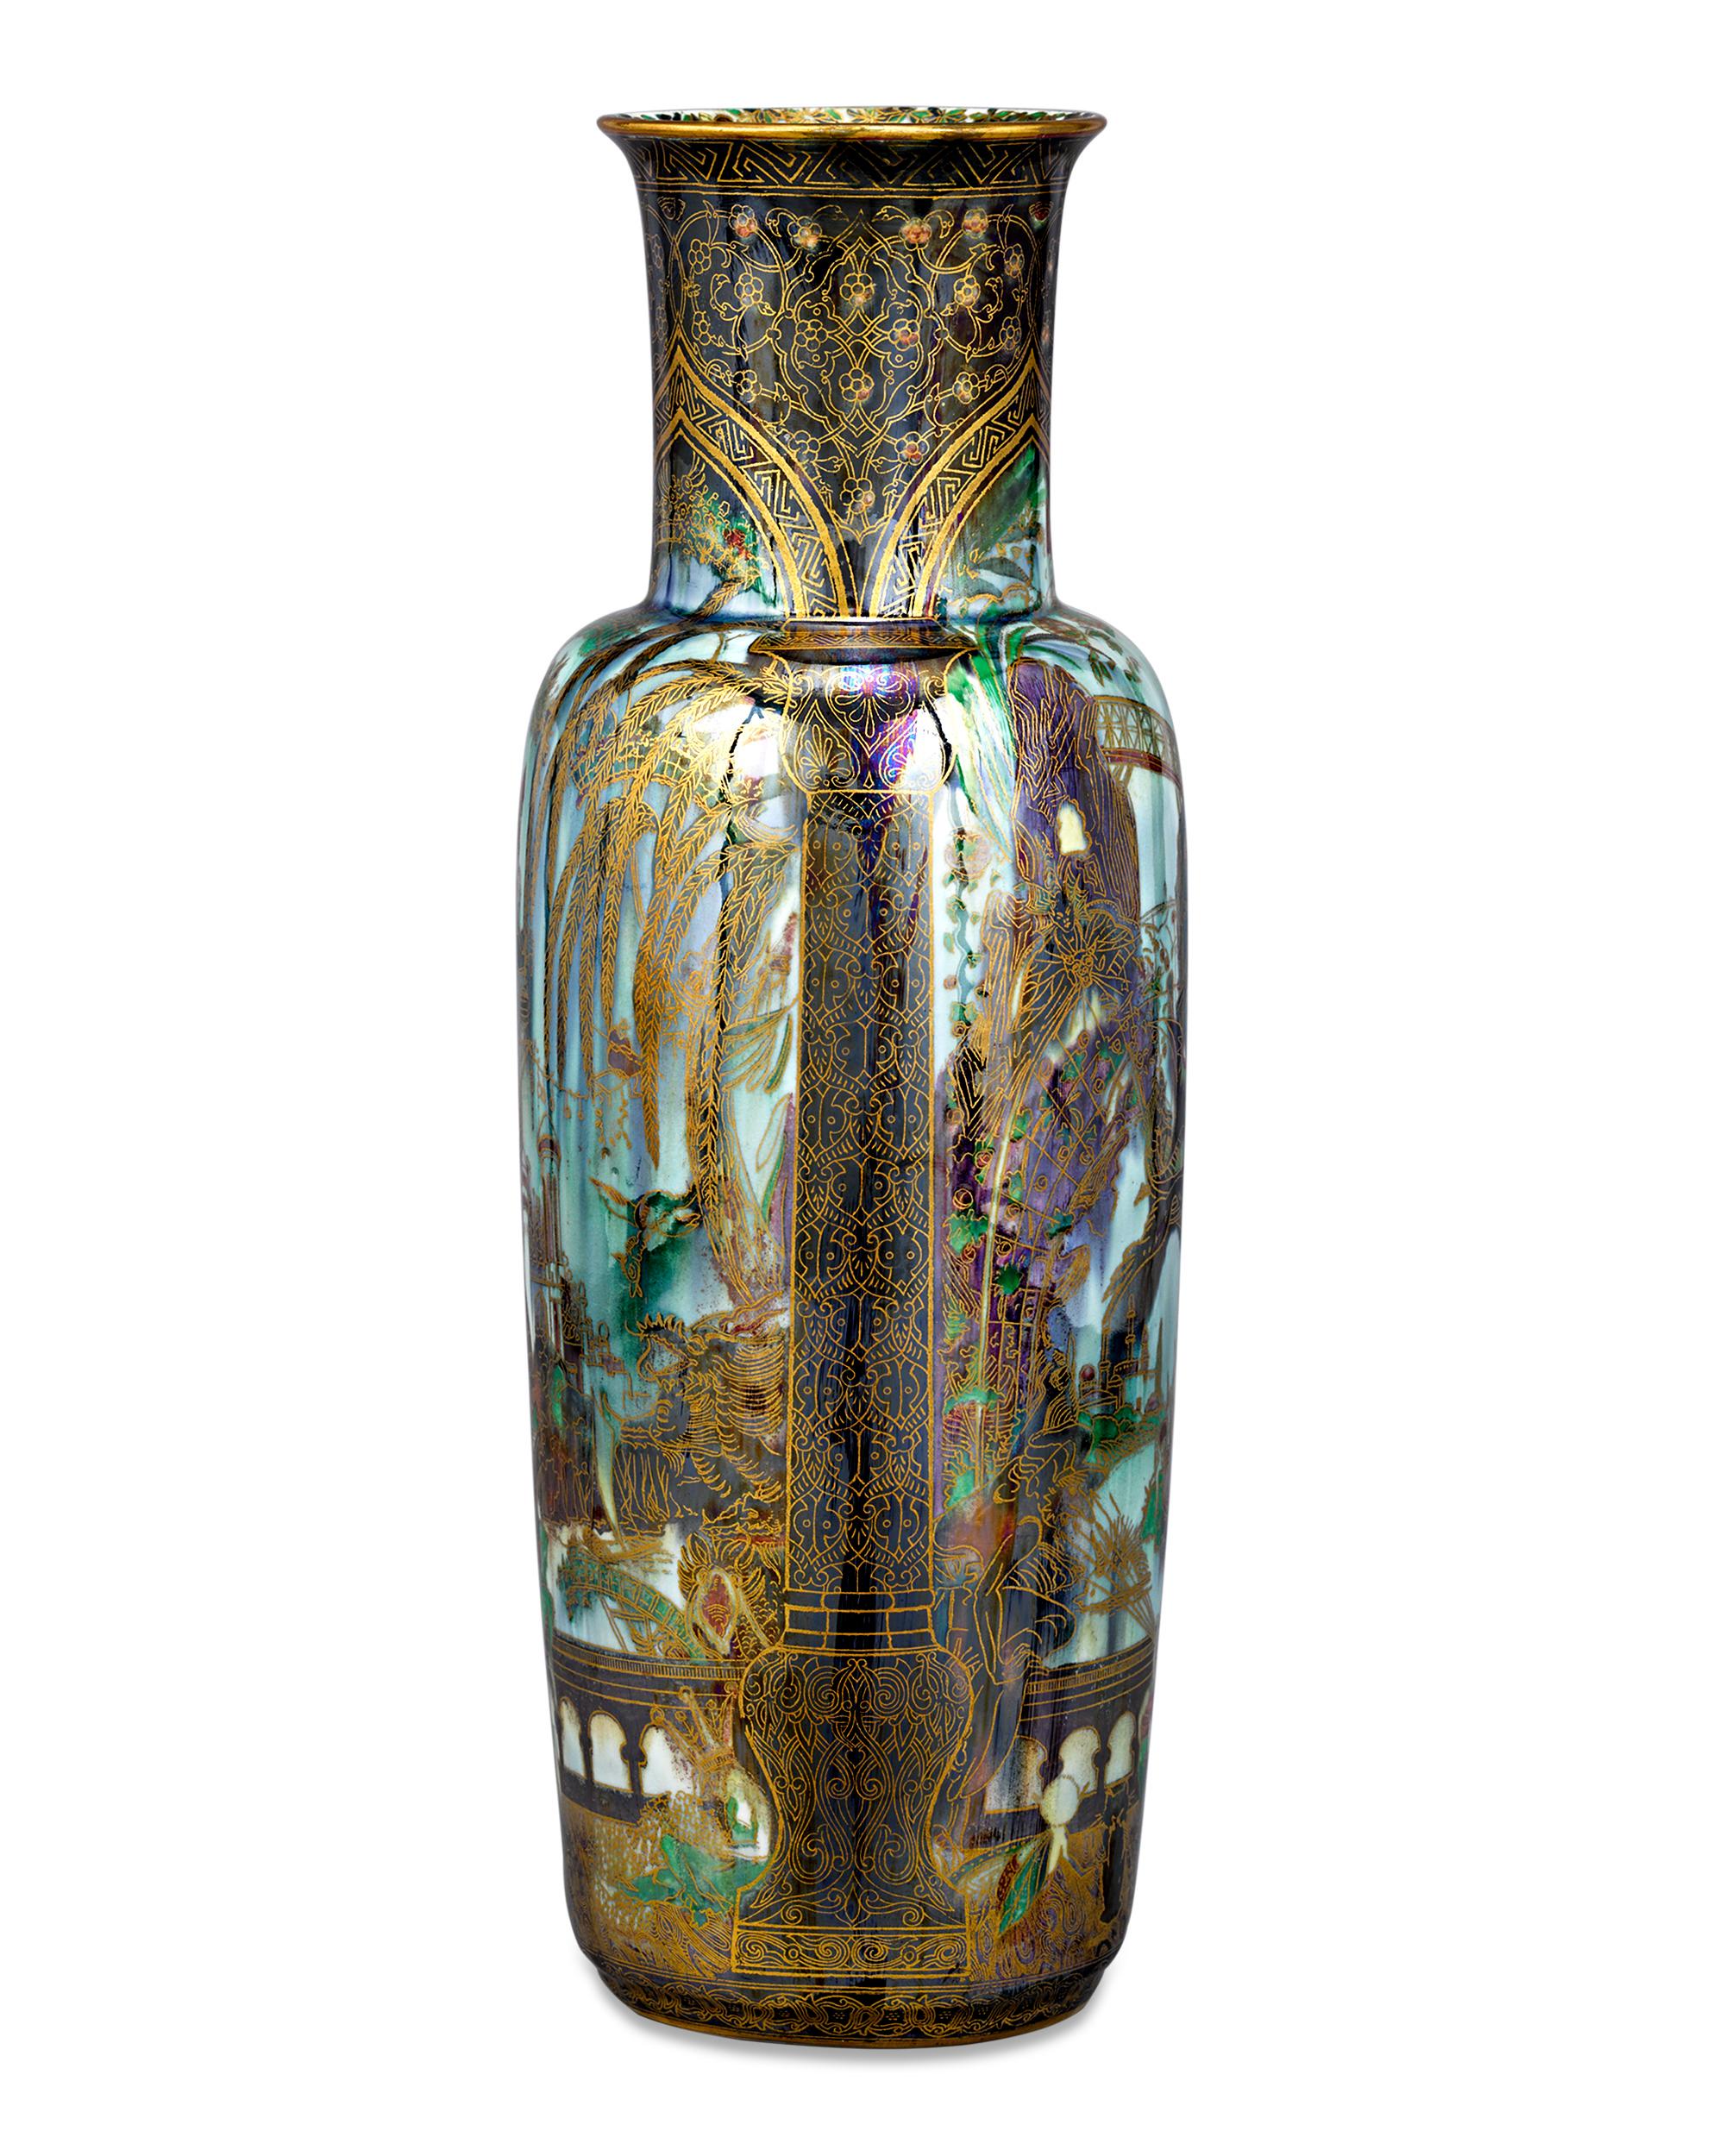 One of the earliest Fairyland Lustre motifs, this Pillar pattern vase by Wedgwood features the fantastical Isle of the Genii, populated with nymphs and elves at every turn. Introduced by Wedgwood artist Daisy Makeig-Jones in 1915, Fairyland Lustre